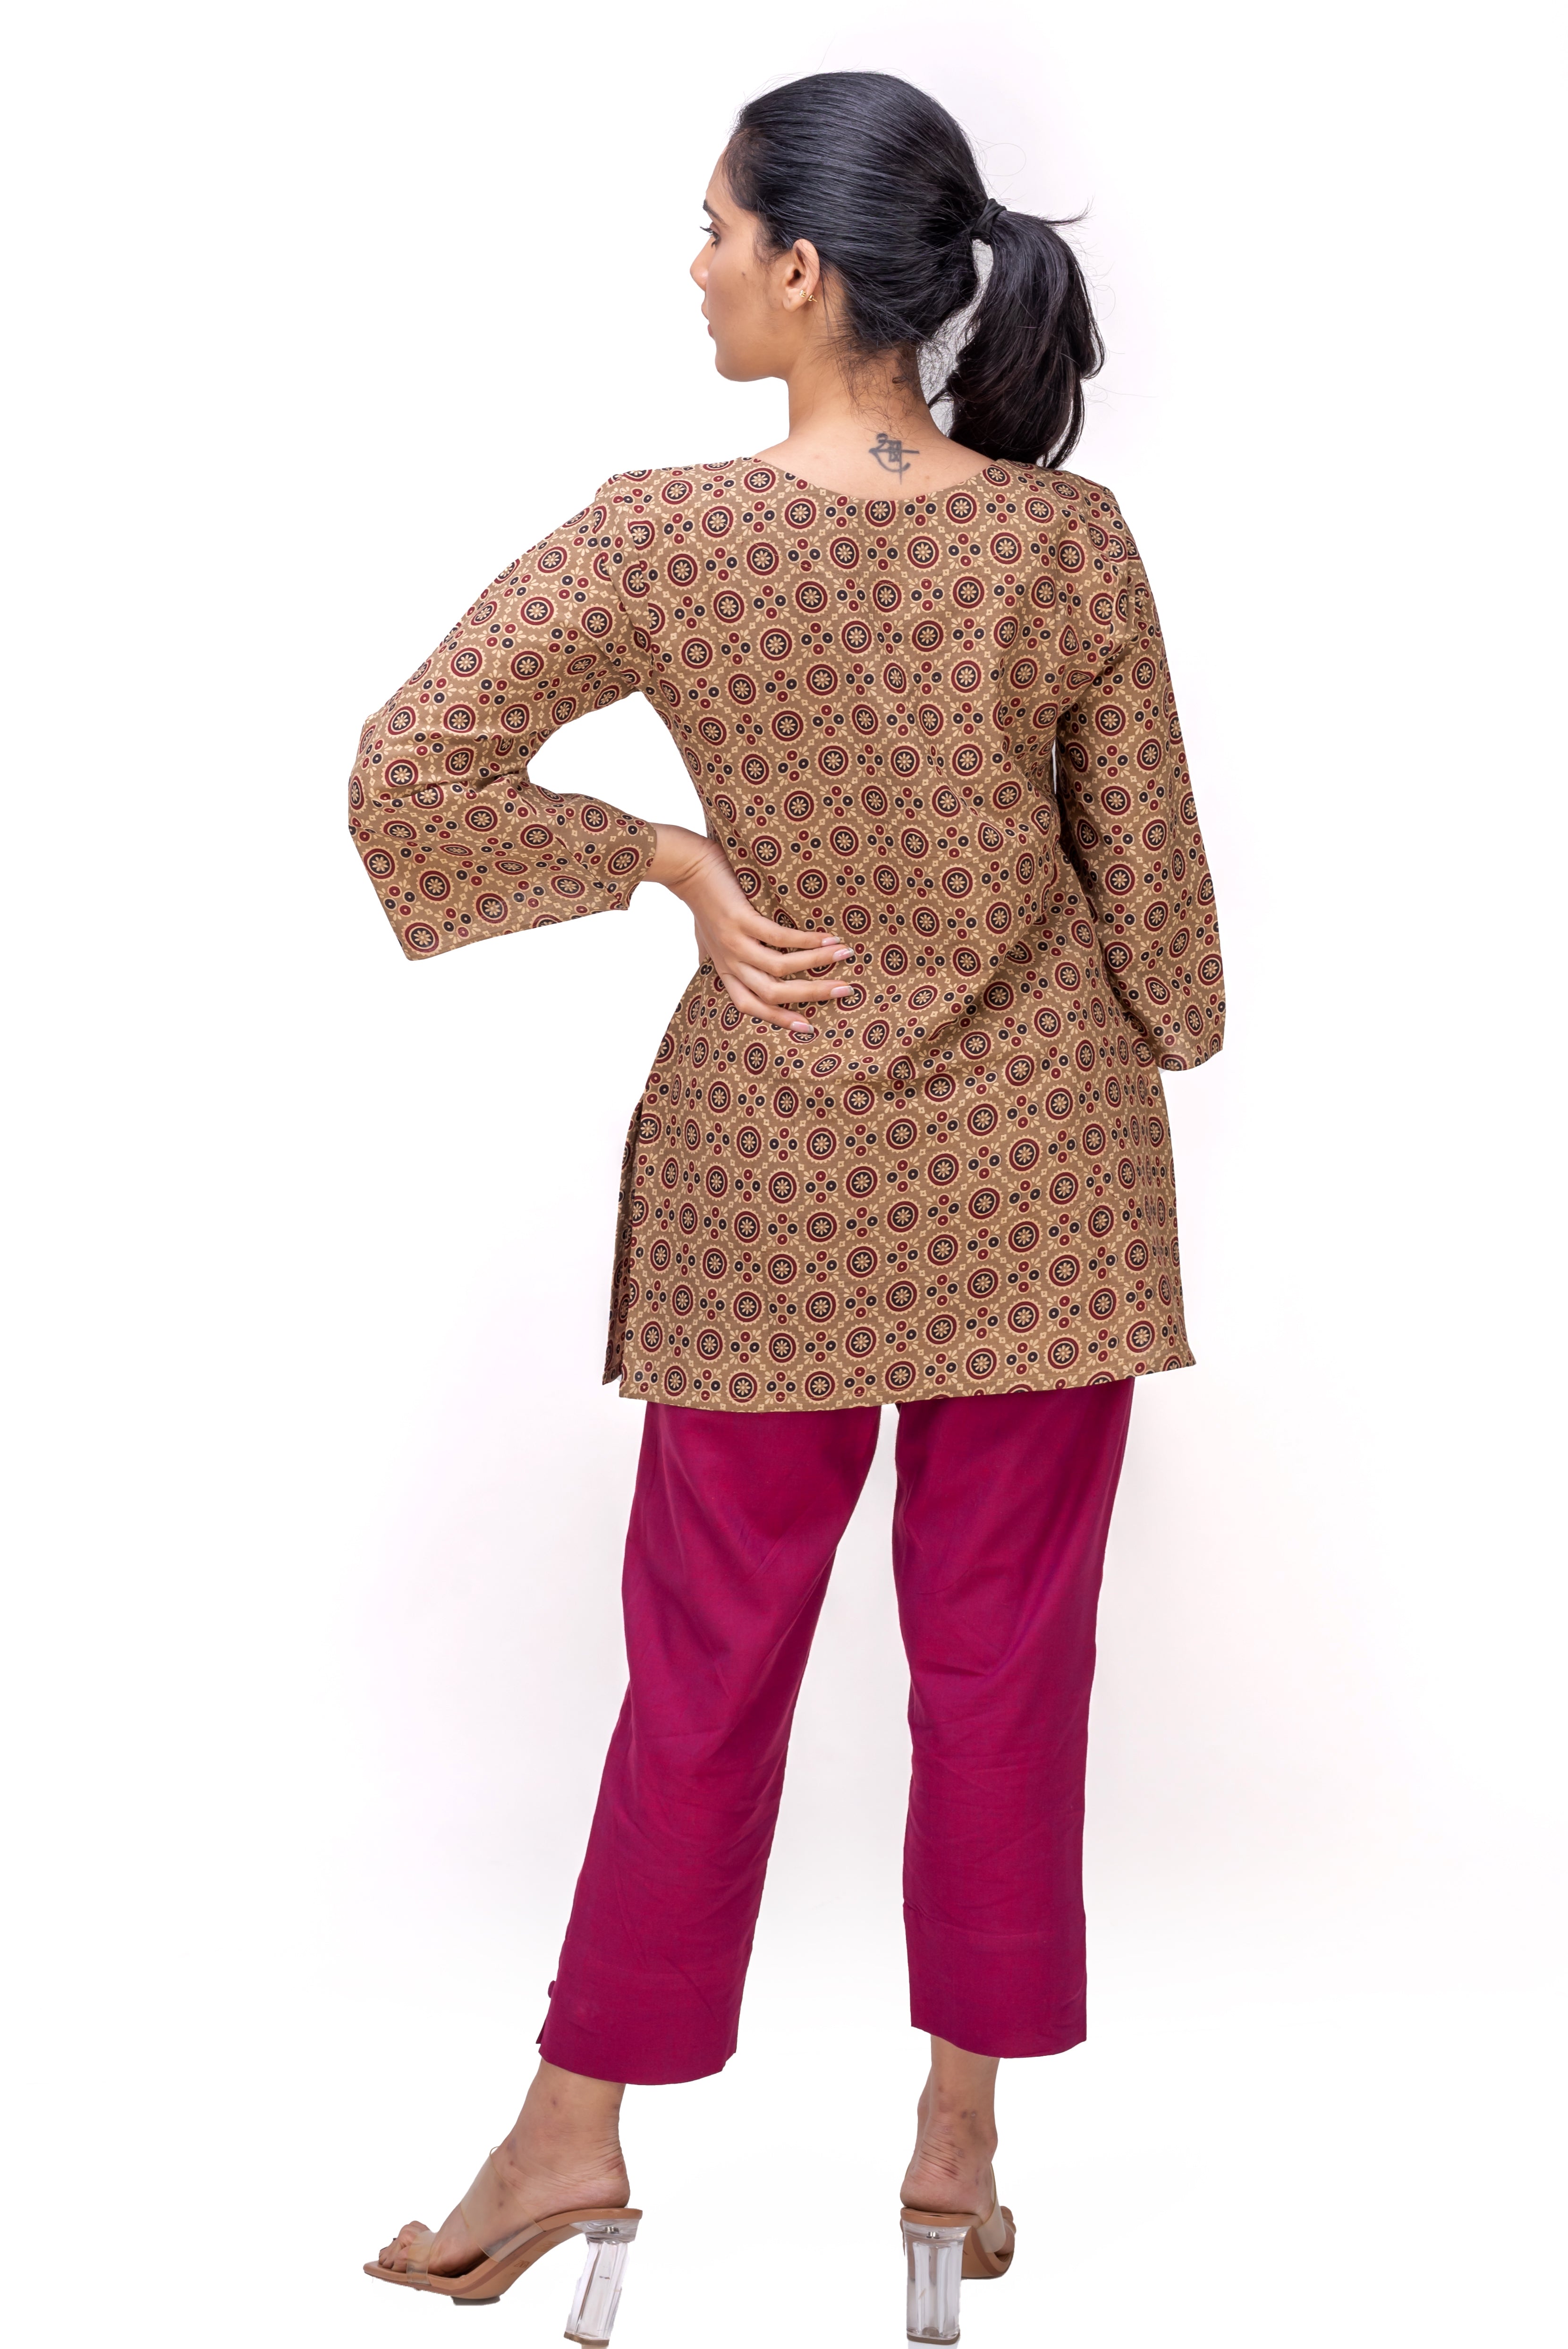 501-149 "Bell" Tunic top